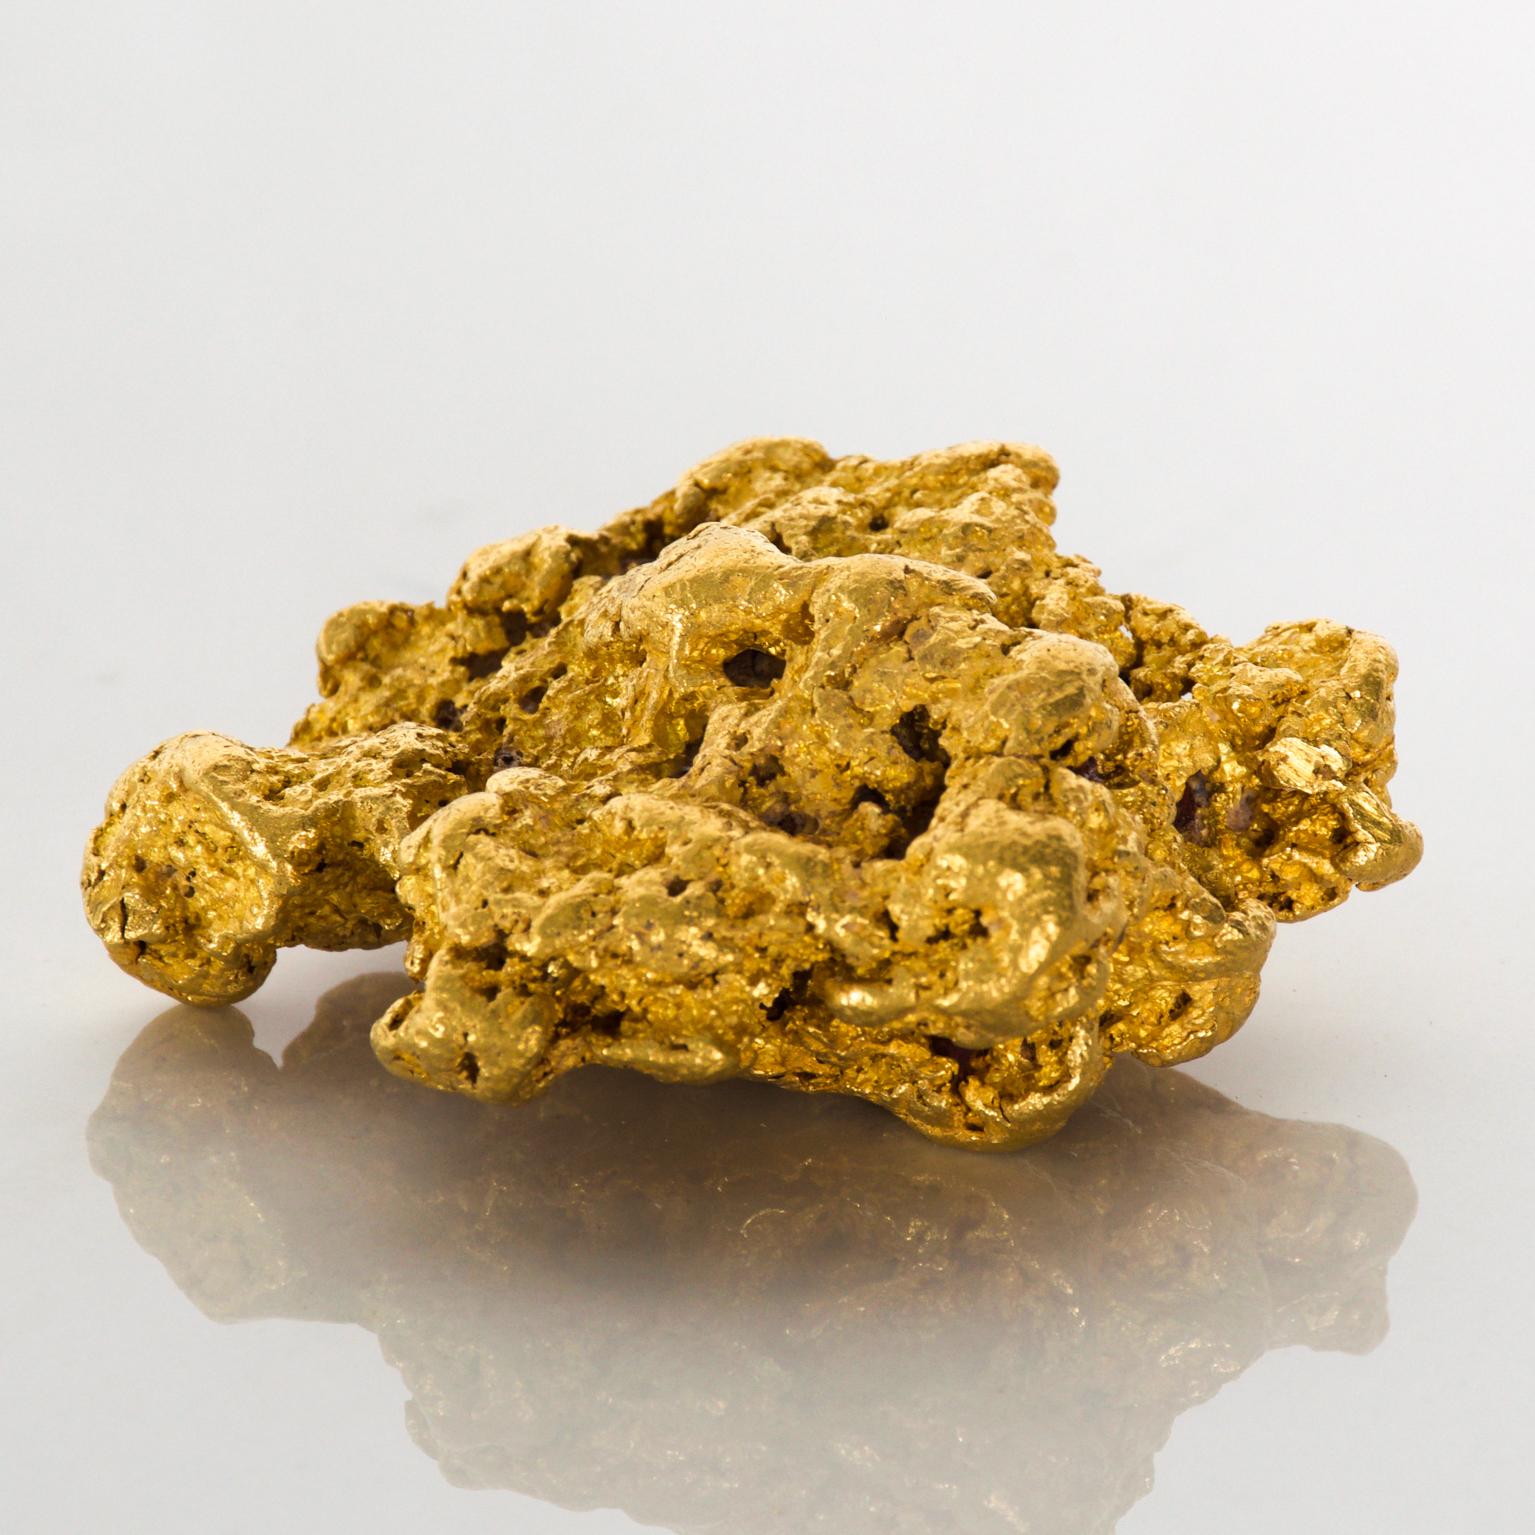 Estate collection large genuine natural gold nugget from Australia
gold nugget weighs approximately 269.5 grams. 
tested at local refinery purity of .94405.
2.75 wide x 2.31 depth x .88 Tall inches weight is 269.5 grams.
Nugget is in its original